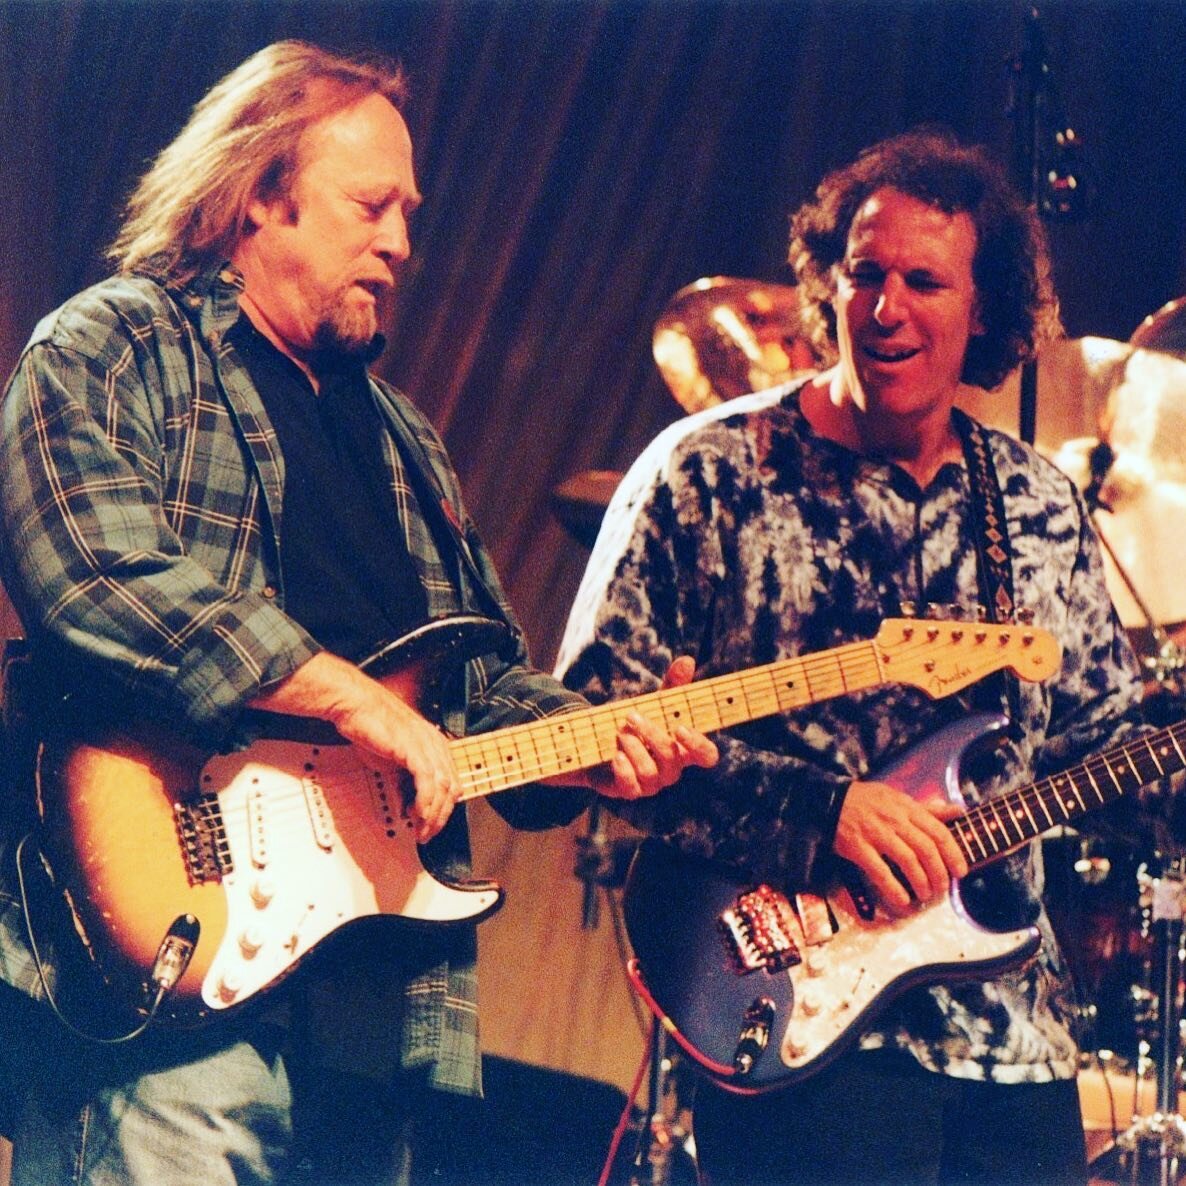 Belated happy birthday to the one and only Stephen Stills, who was an early mentor in my development as a musician and guitarist, and to my surprise, became a bandmate for two tours with Crosby, Stills &amp; Nash years later. Long May You Run, my fri